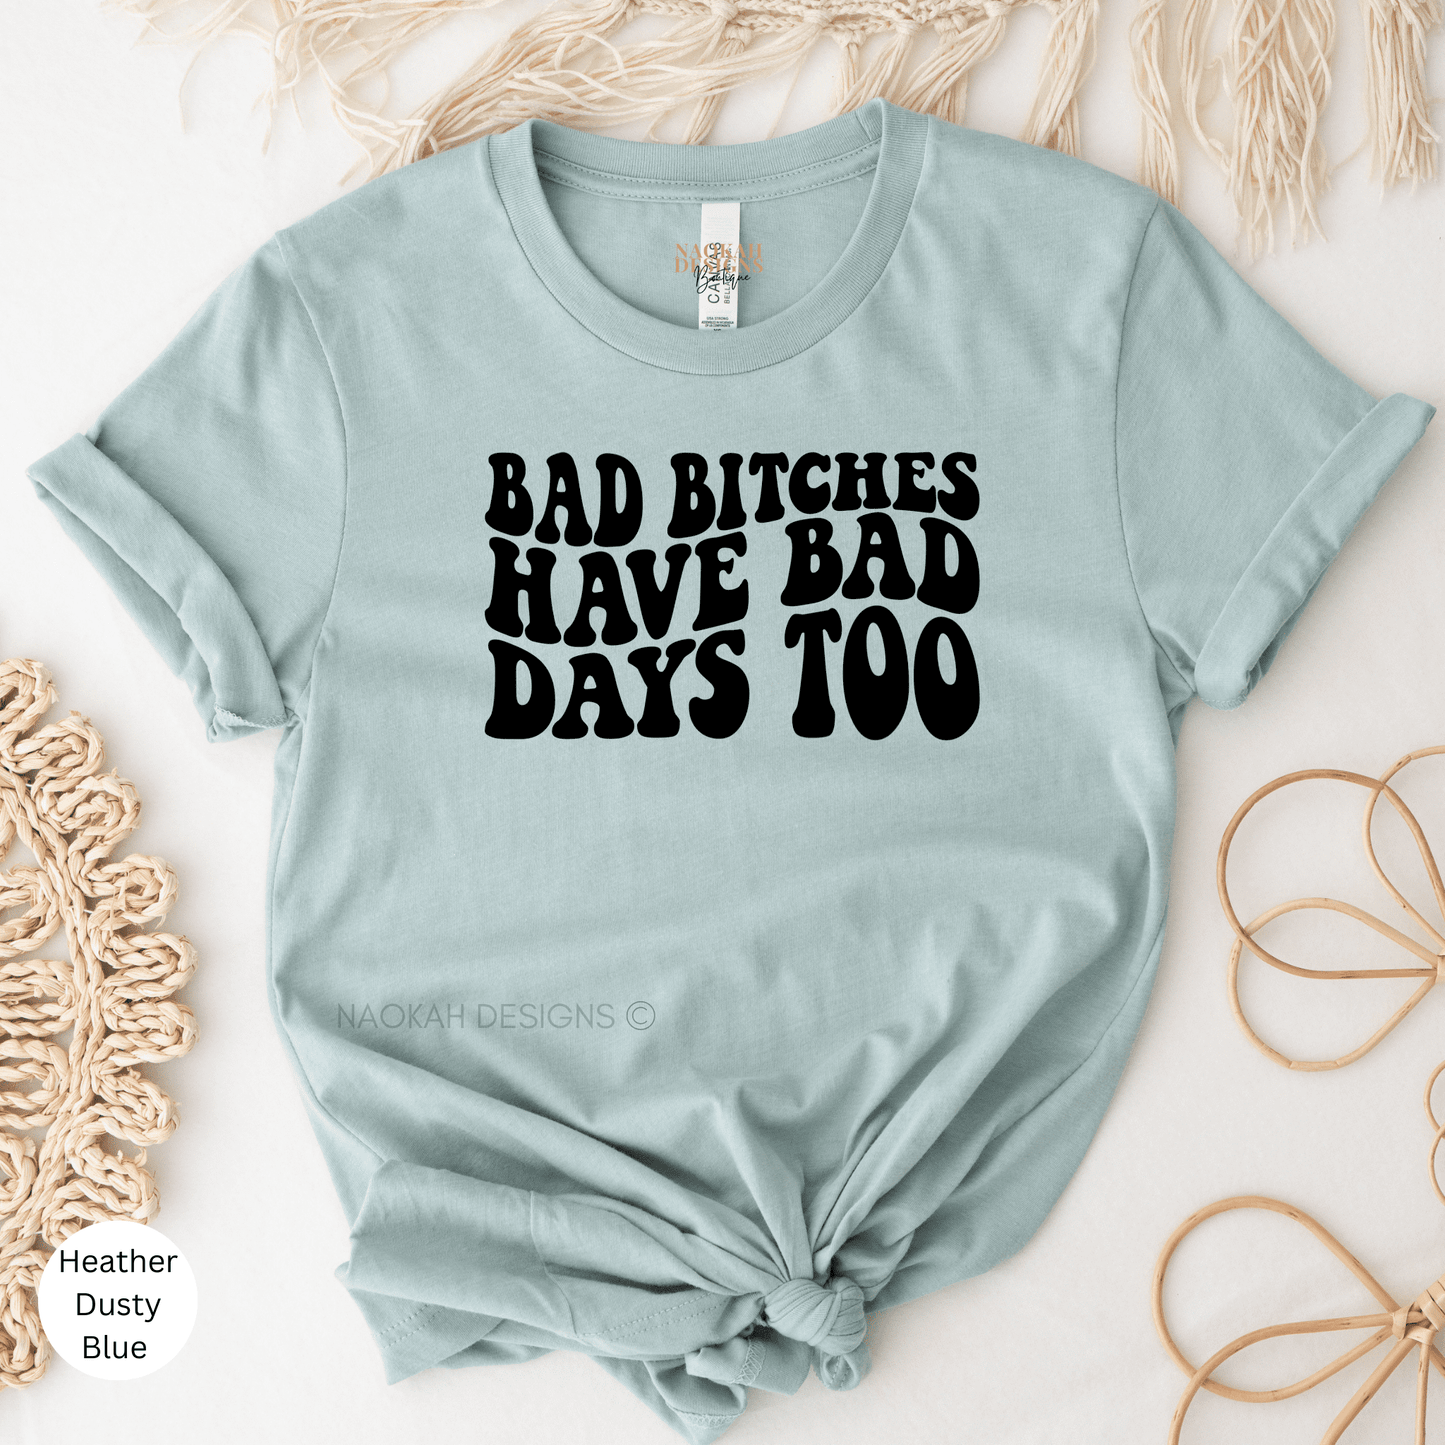 bad bitches have bad day too shirt, bad bitches club, bad bitches only, good girls have bad days too, mama tried, badass mama